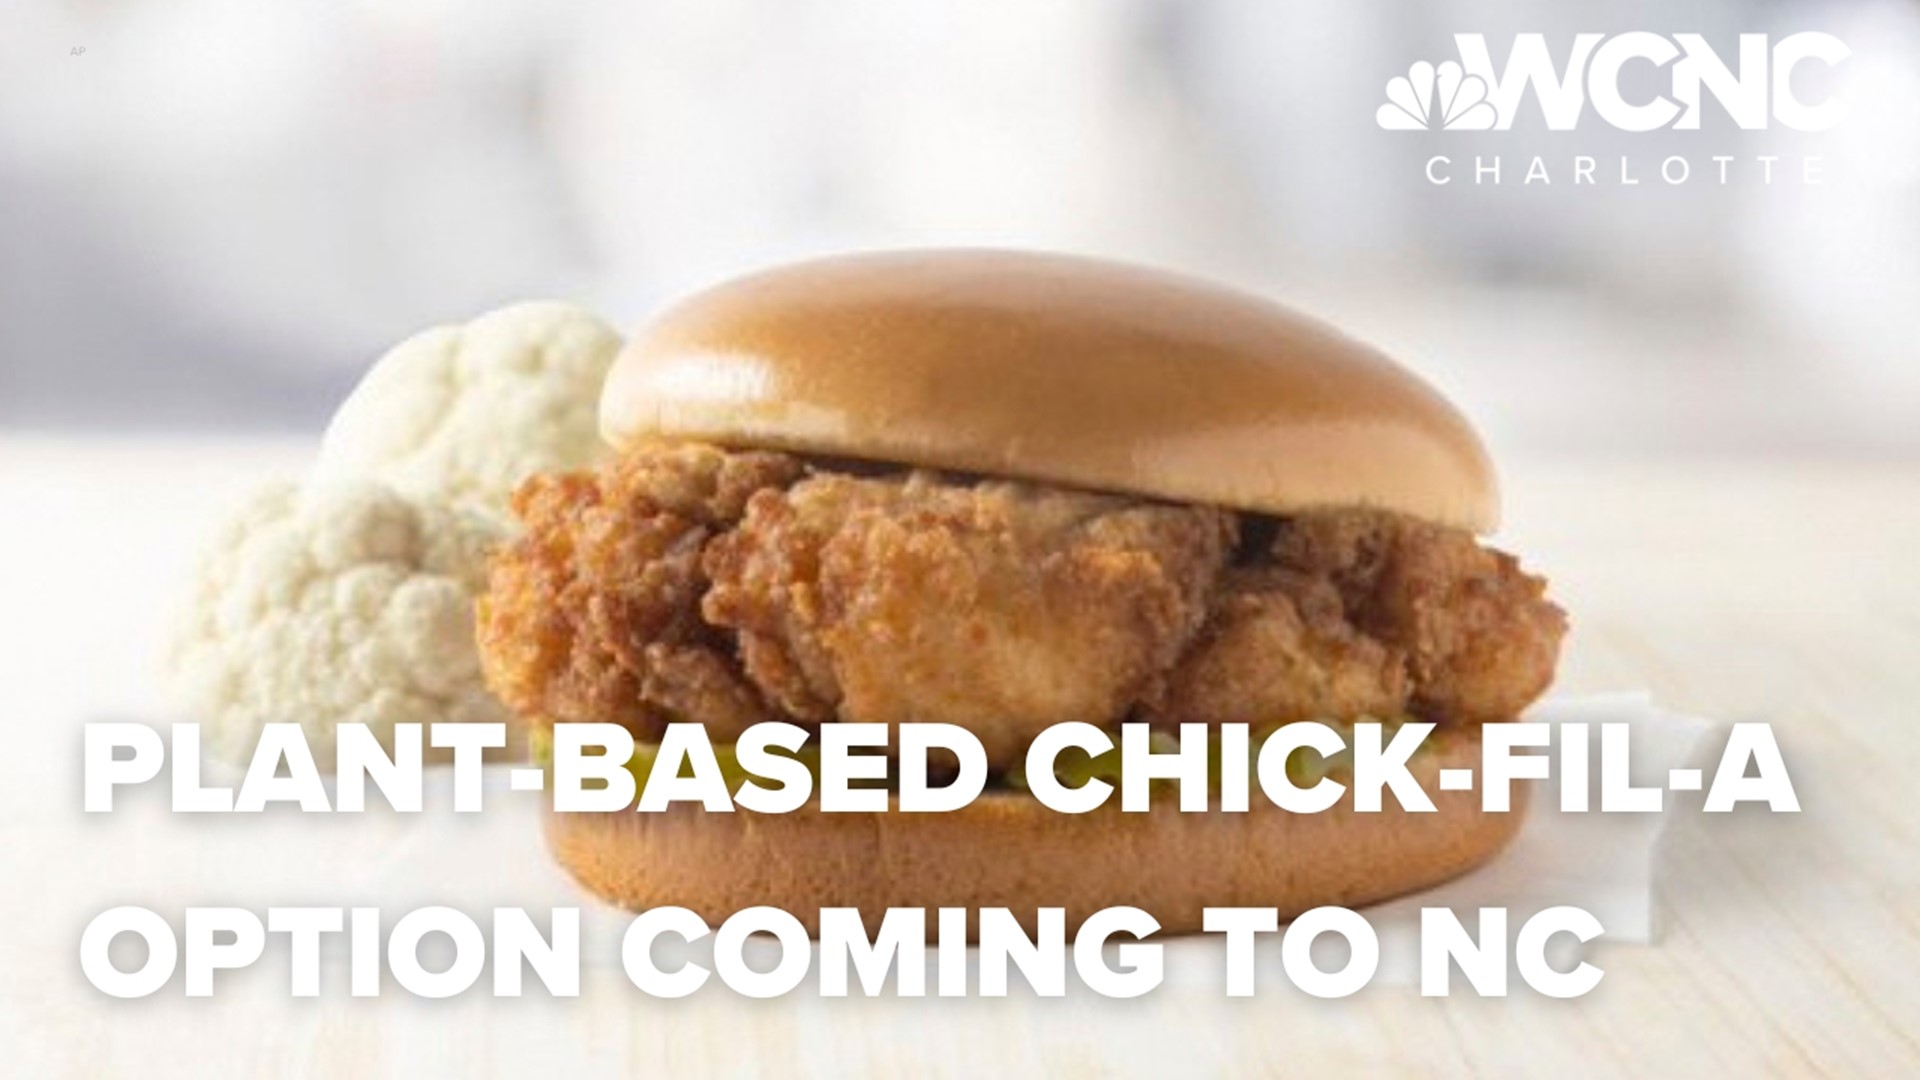 The fast food chain says it's supposed to look just like a regular chicken sandwich.